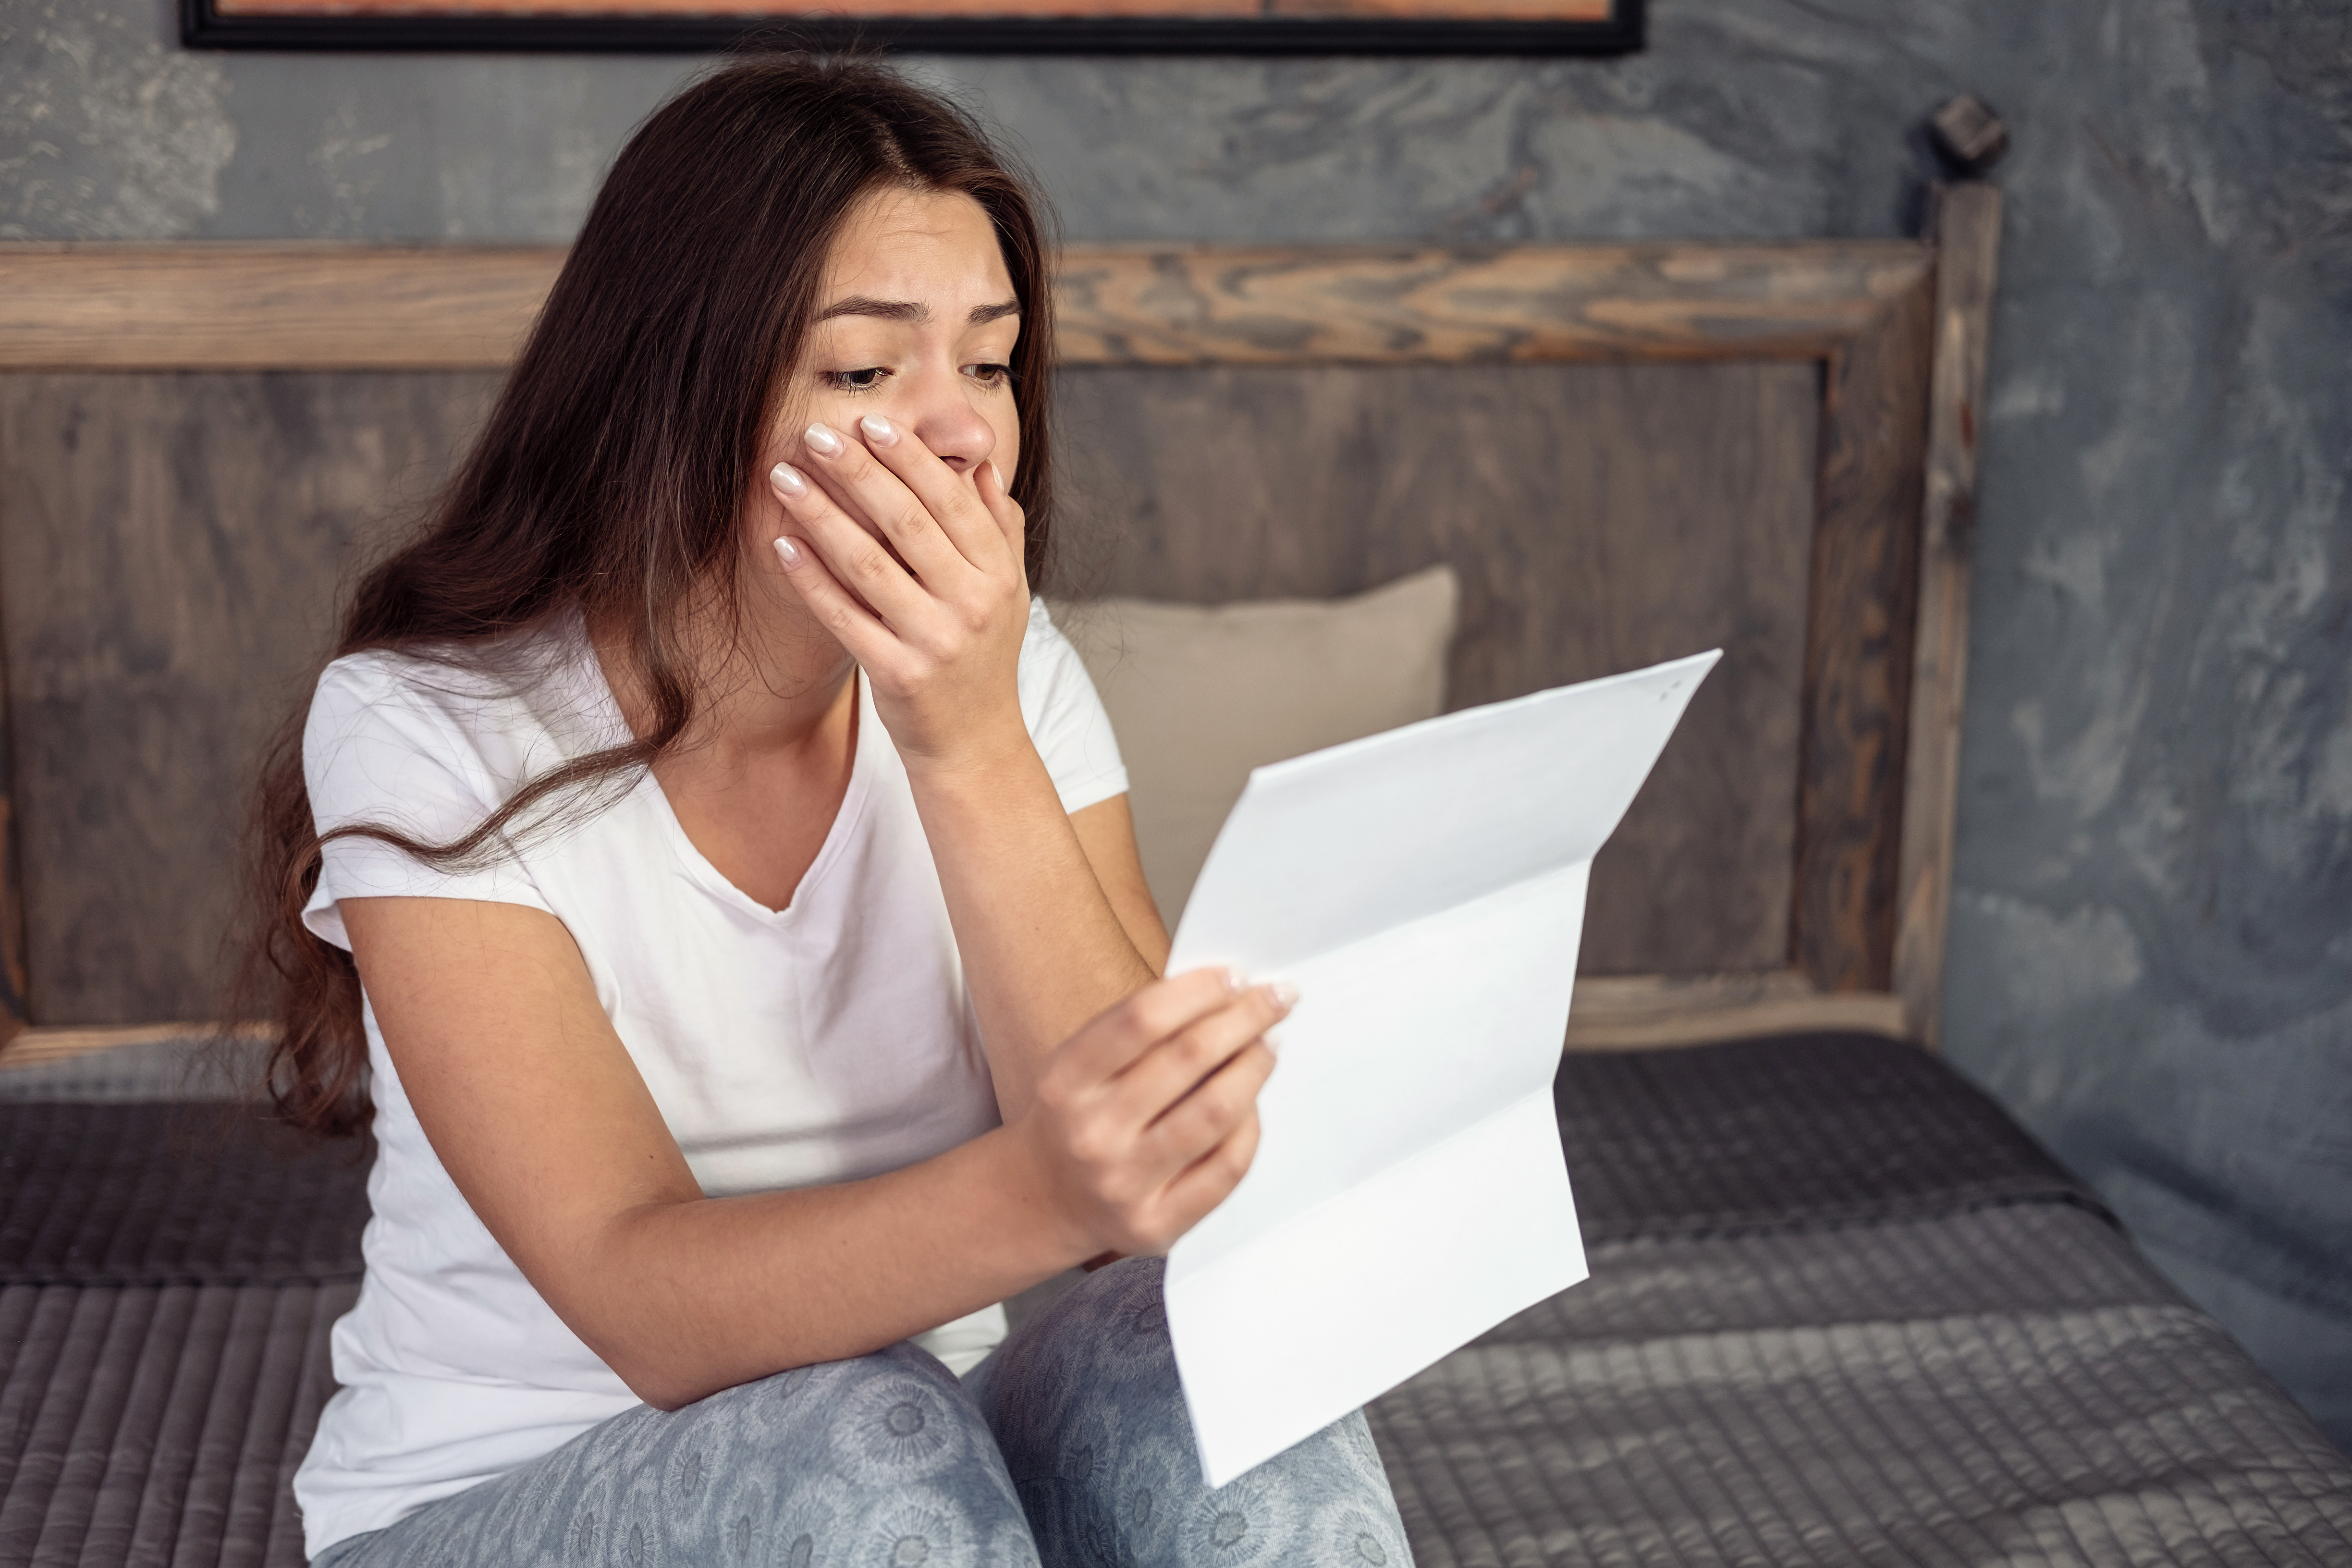 A shocked young woman reading a letter | Source: Shutterstock